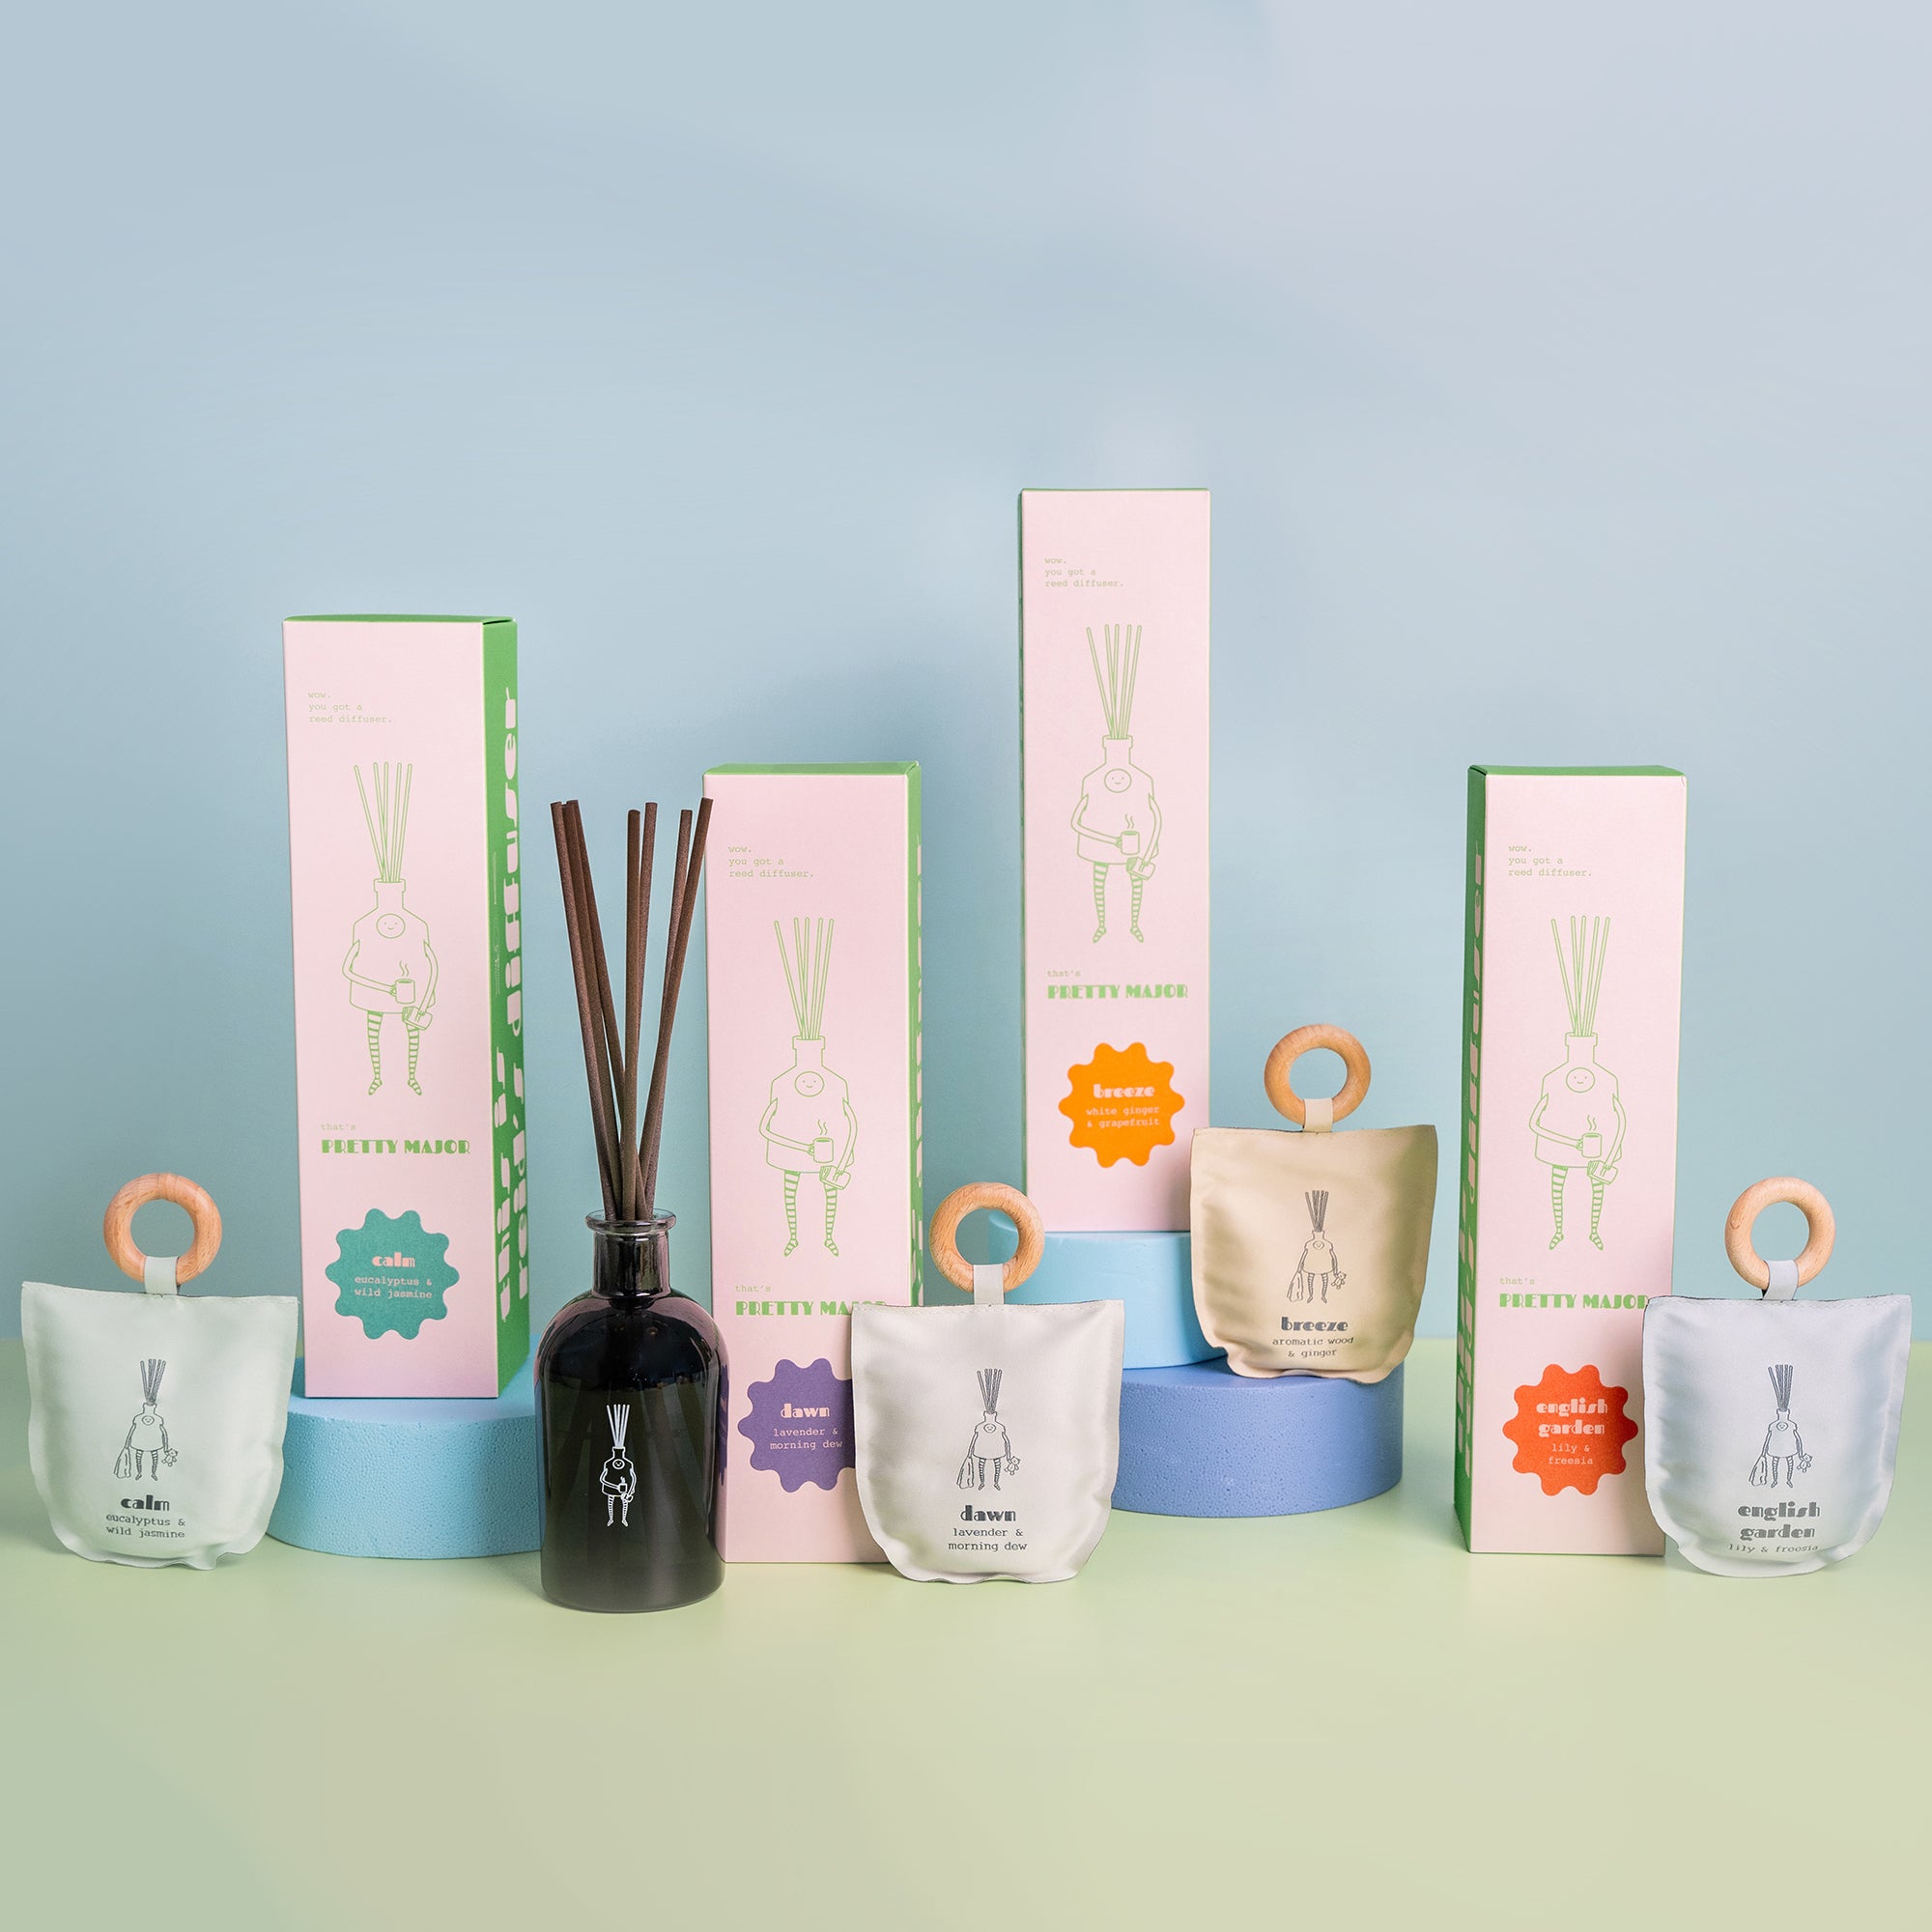 Pretty Major Home Fragrance range all reed diffusers and scented sachets